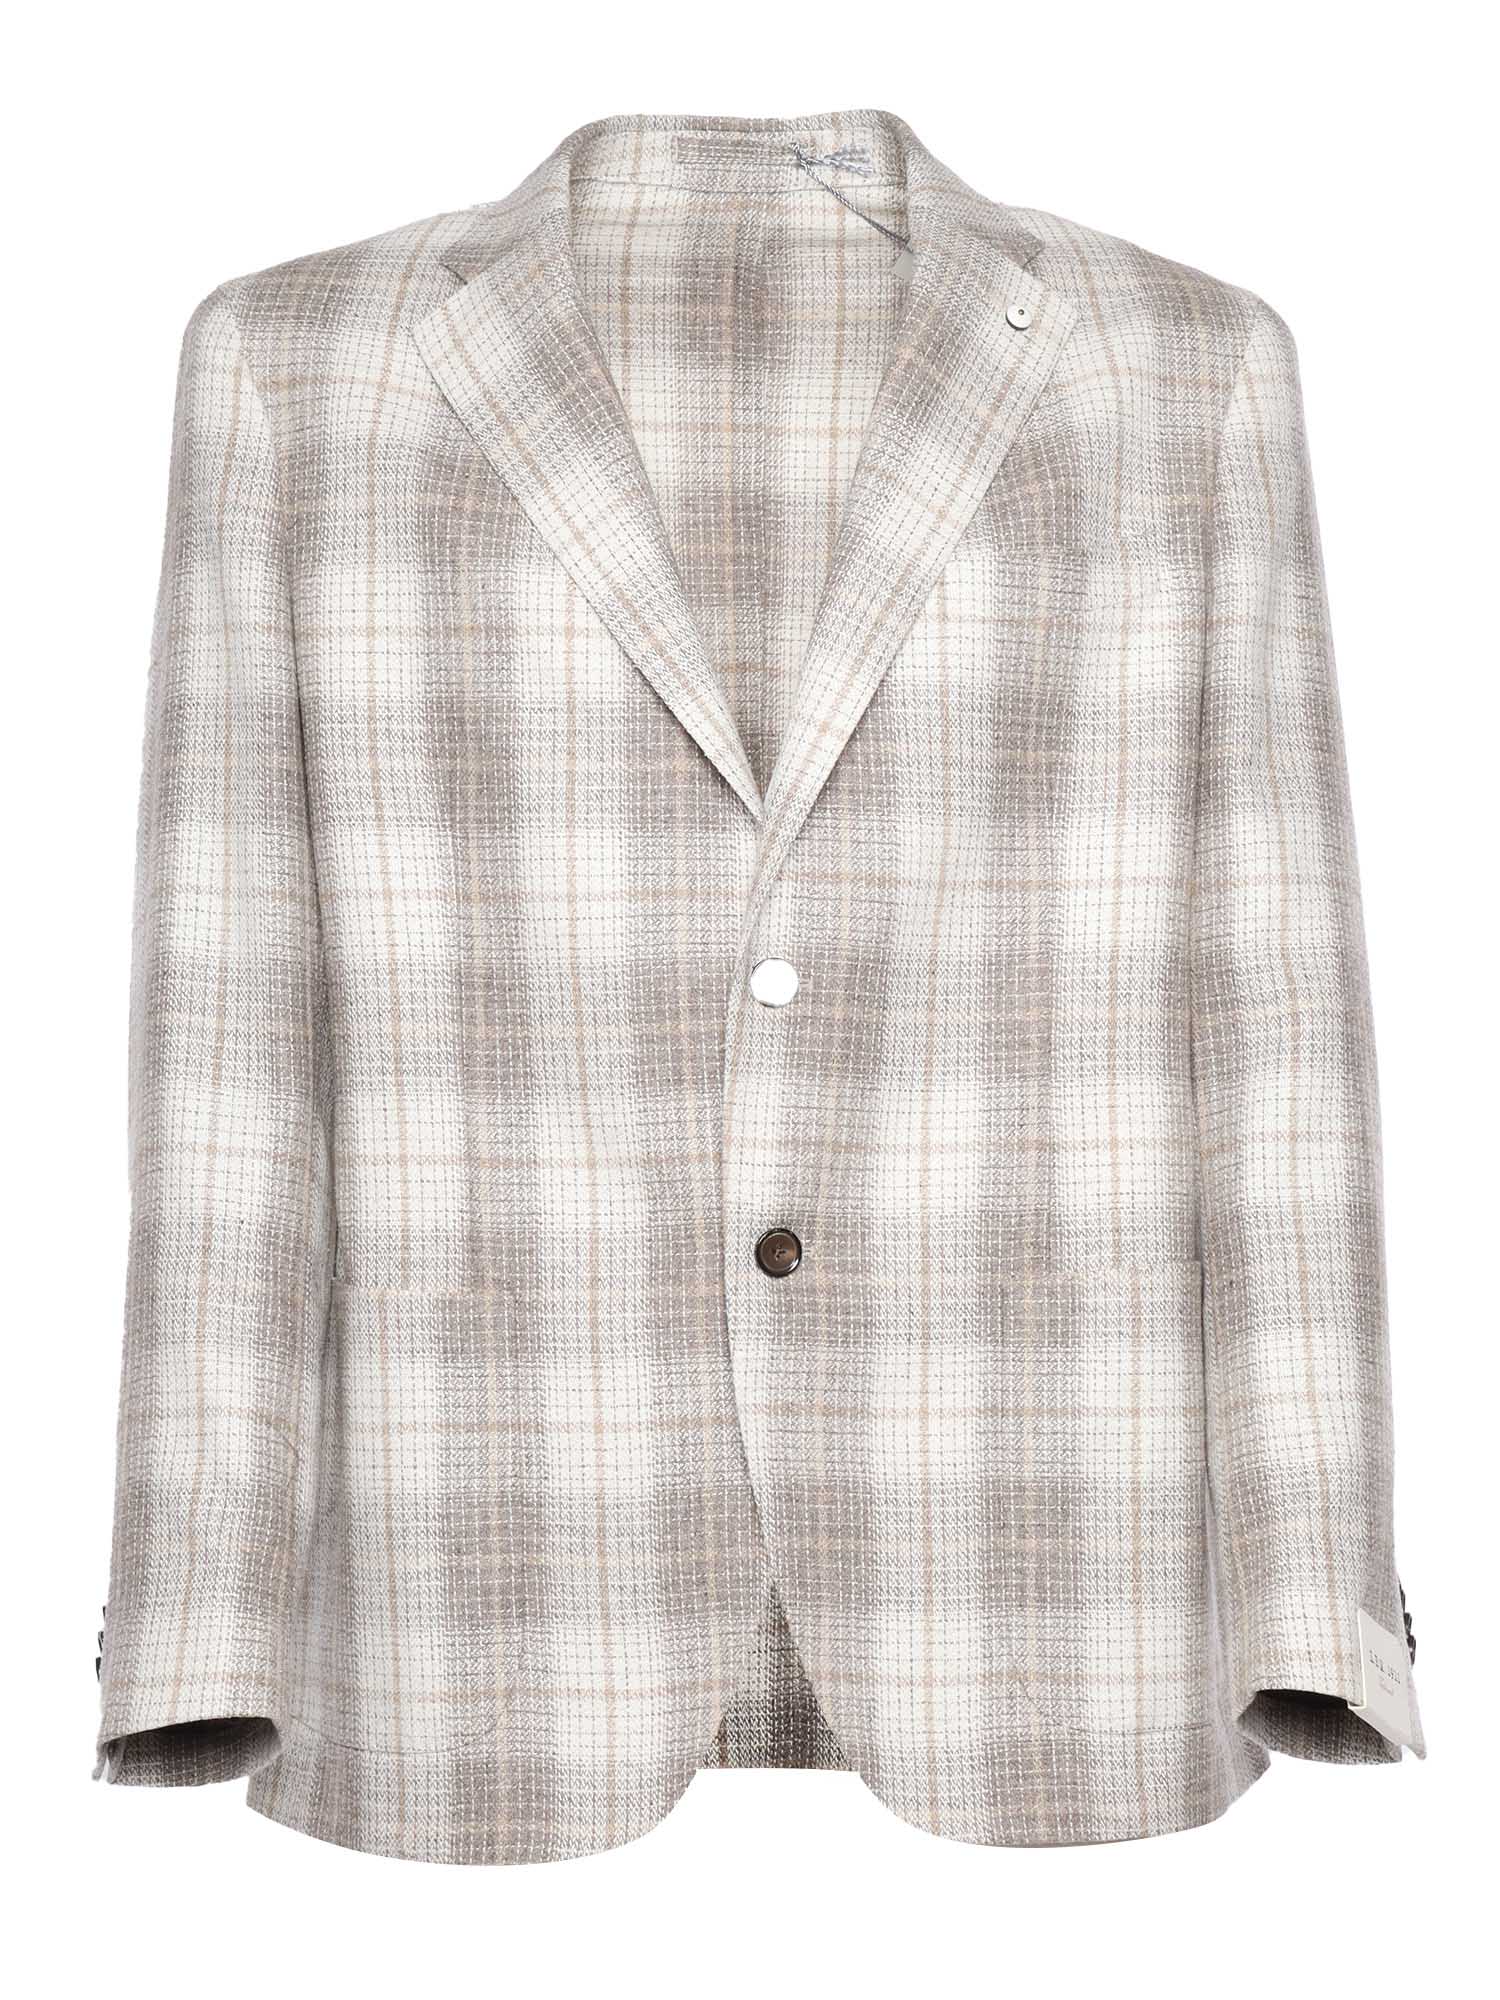 L.B.M. 1911 Single-breasted Check Jacket